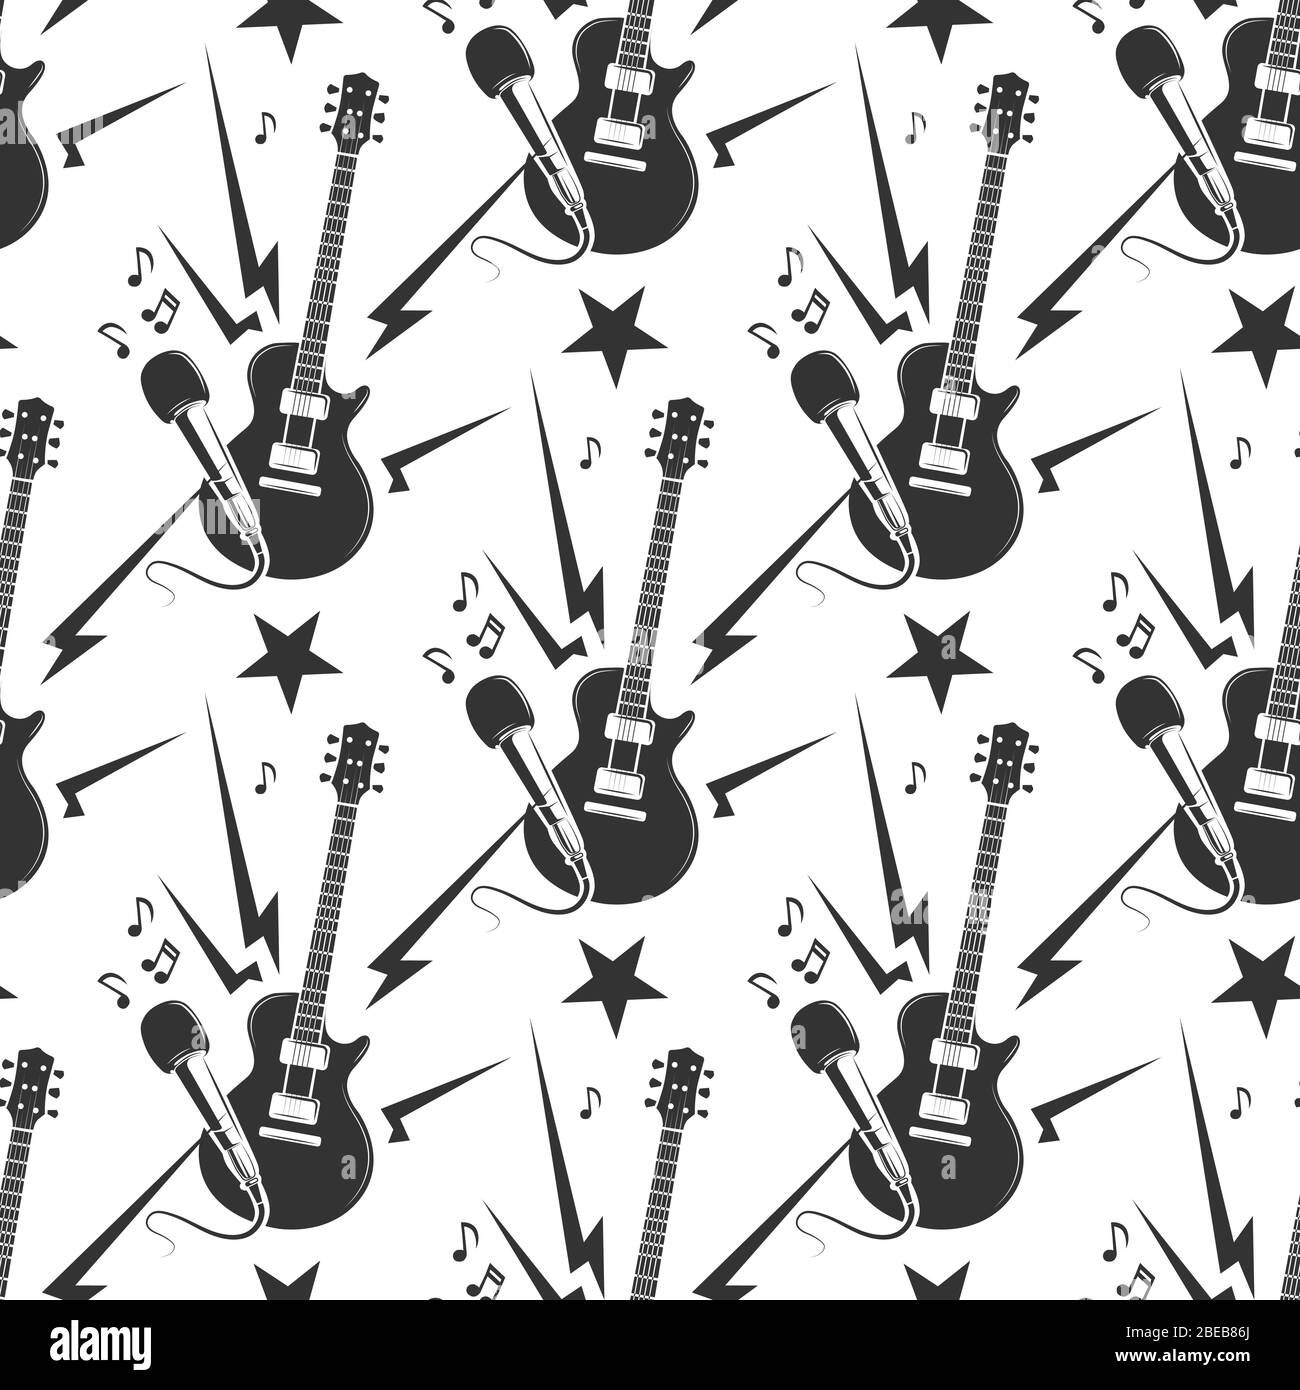 Rock music seamless pattern with guitars and microphones. Vector illustration Stock Vector